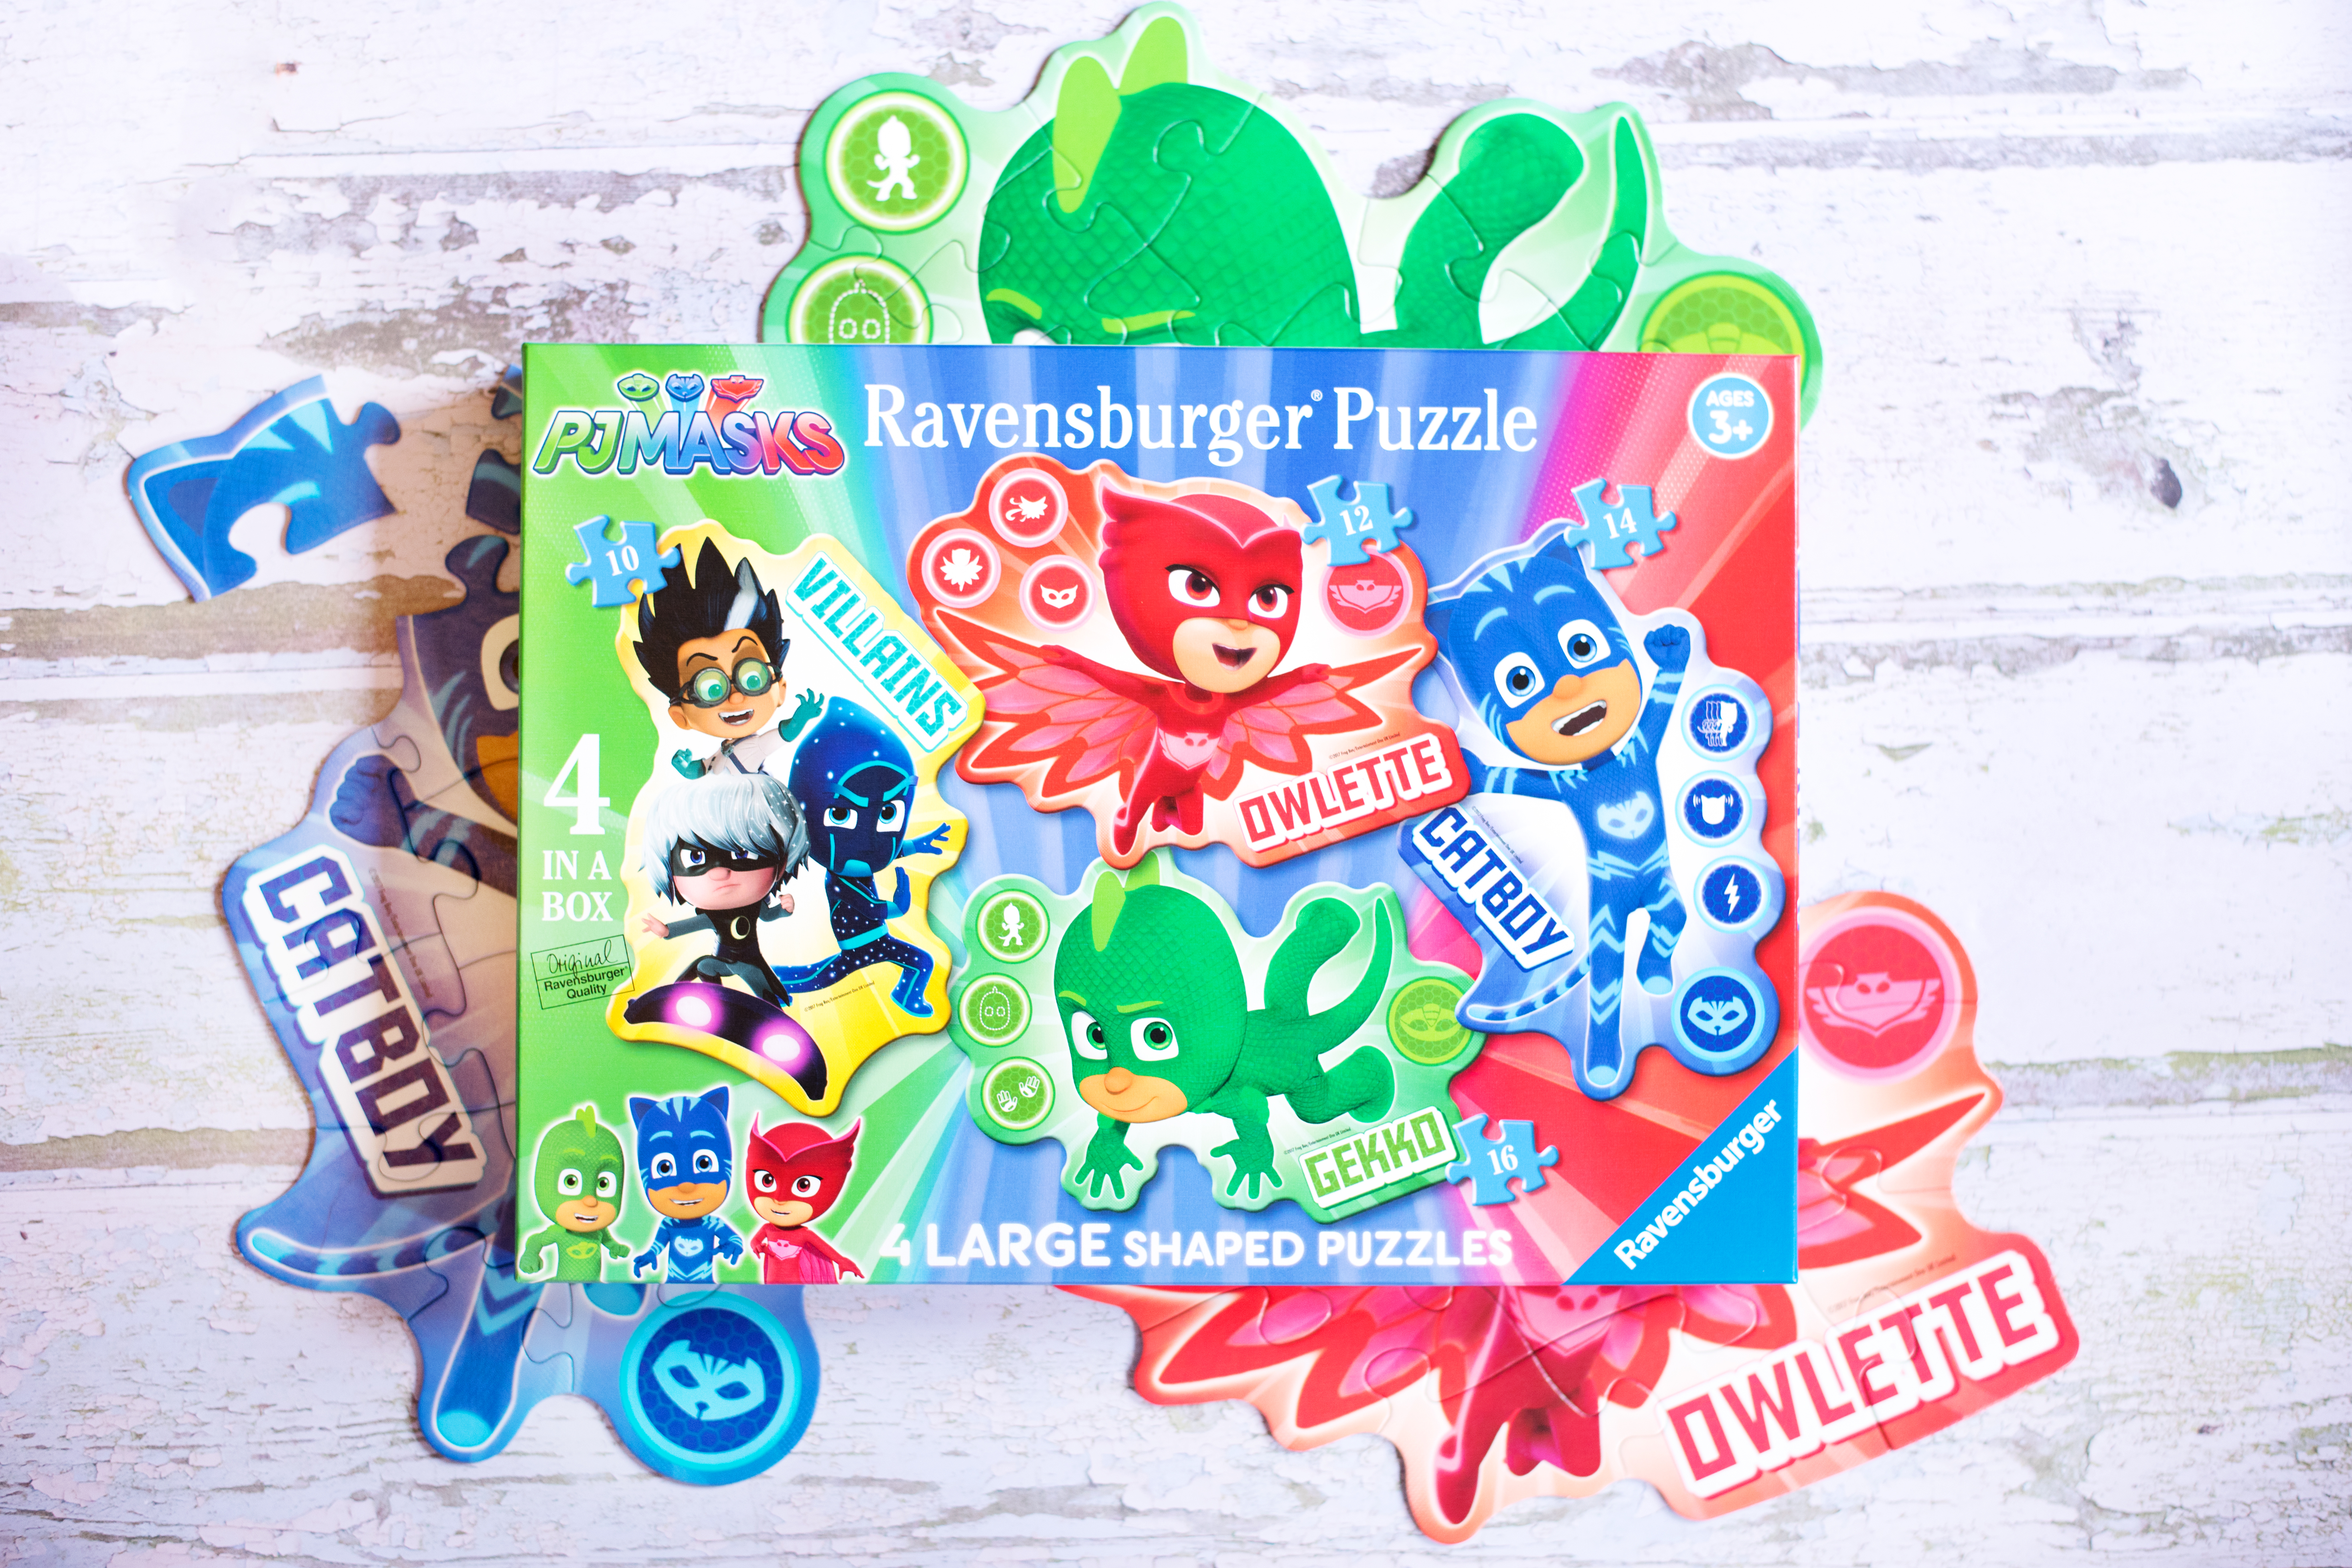 06974 Ravensburger PJ Masks Jigsaw Puzzle 4 in a Box Childrens Kids 72 Pieces 